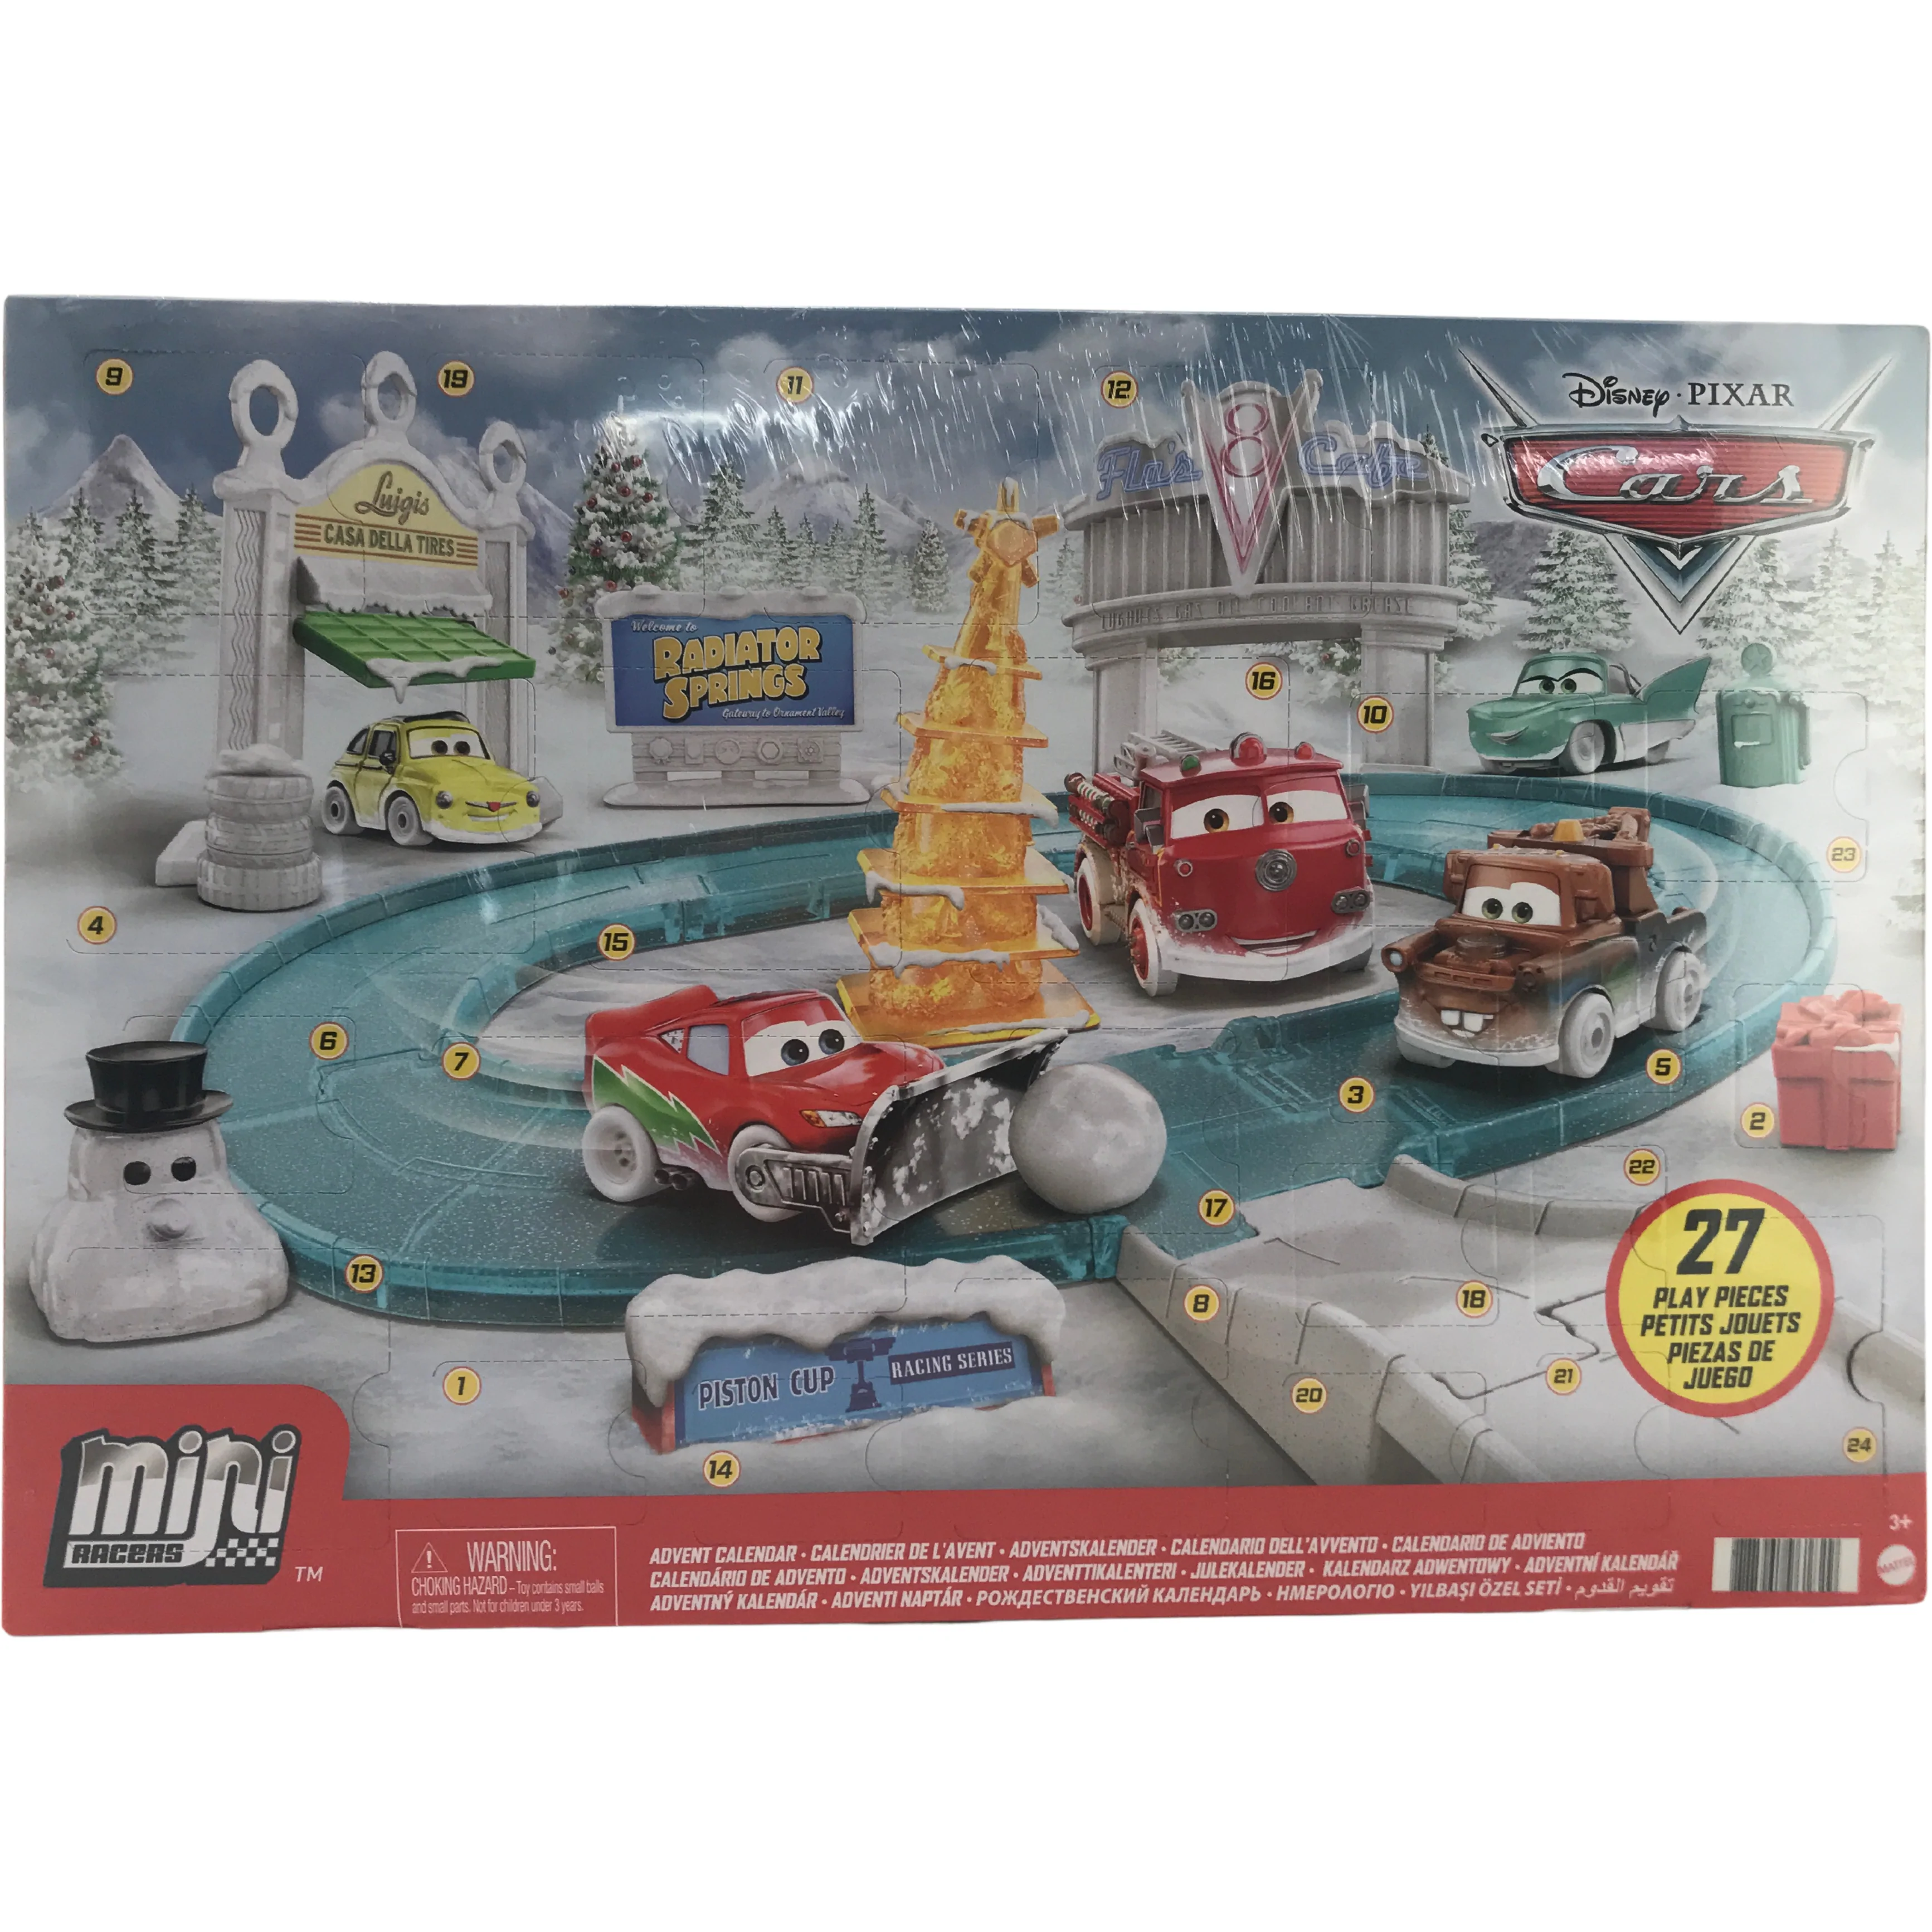 Mattel Cars Mini Racers Advent Calendar / 24 Days to Open / 27 Pieces in Total / Mini Racers